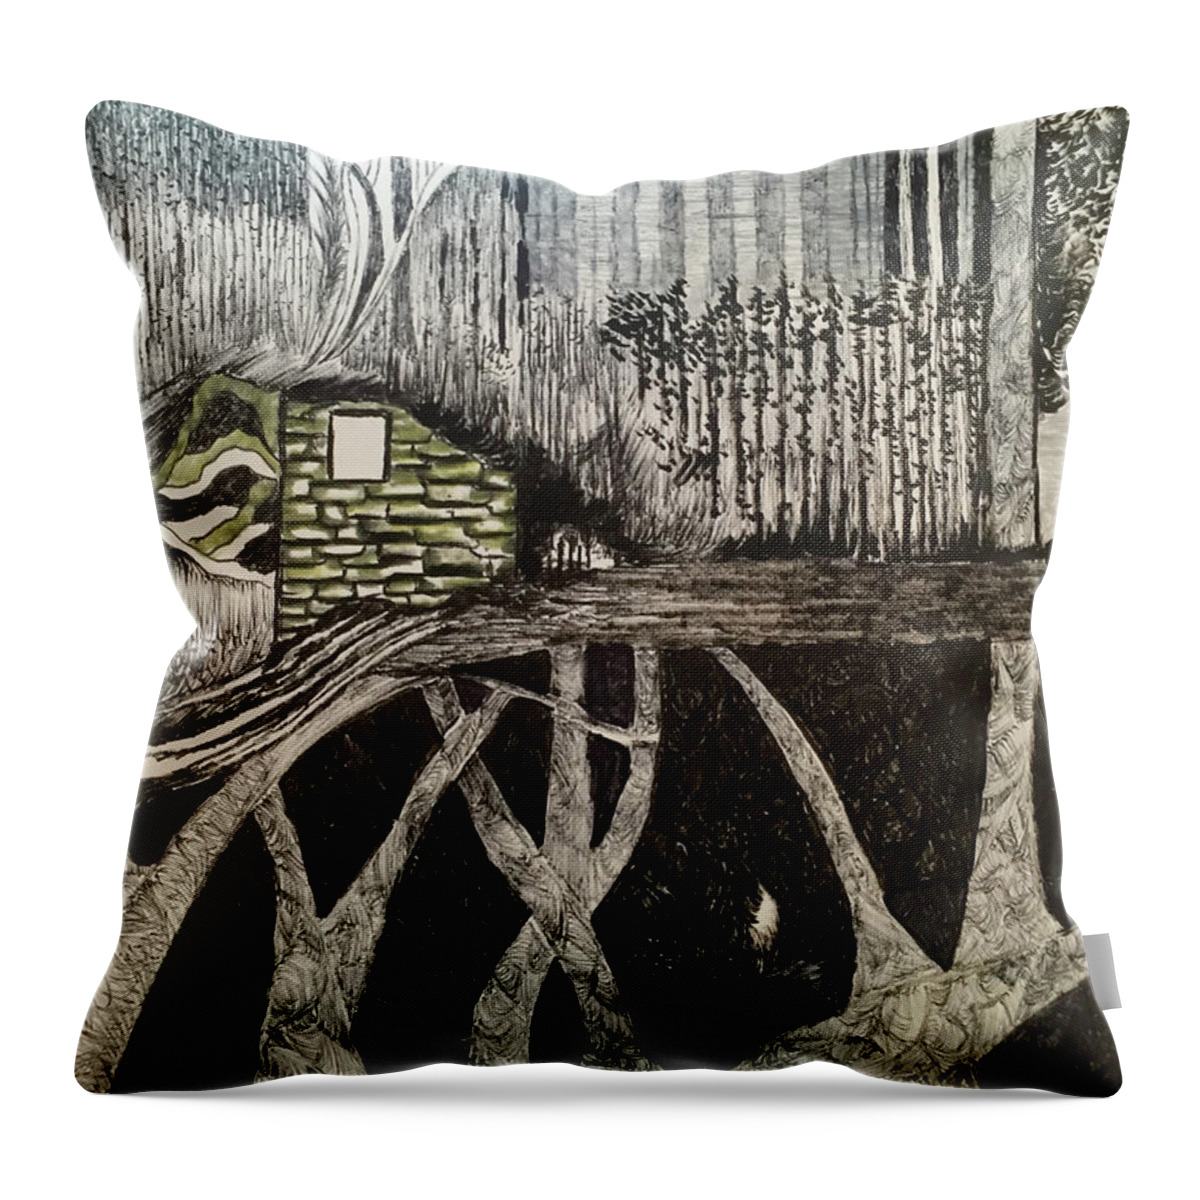 Black And Whitw Throw Pillow featuring the drawing Scene elevated by trees by Dennis Ellman